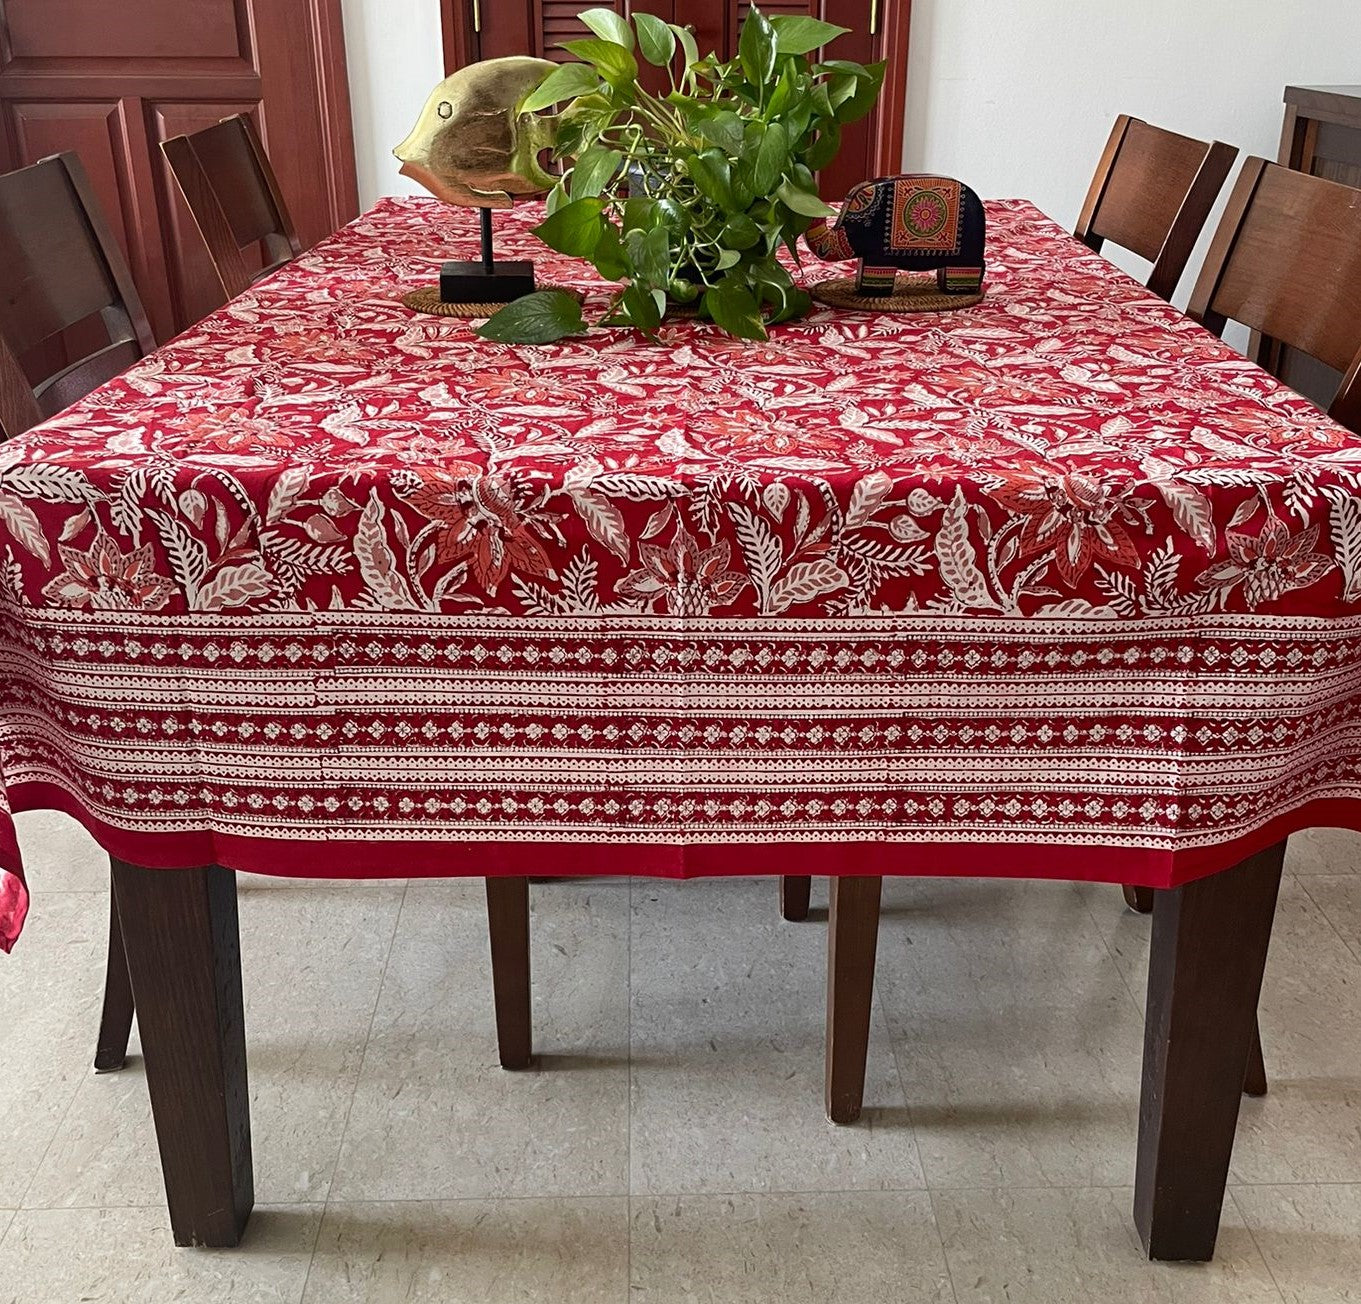 High quality and affordable dining table cover for women, shop now in Singapore